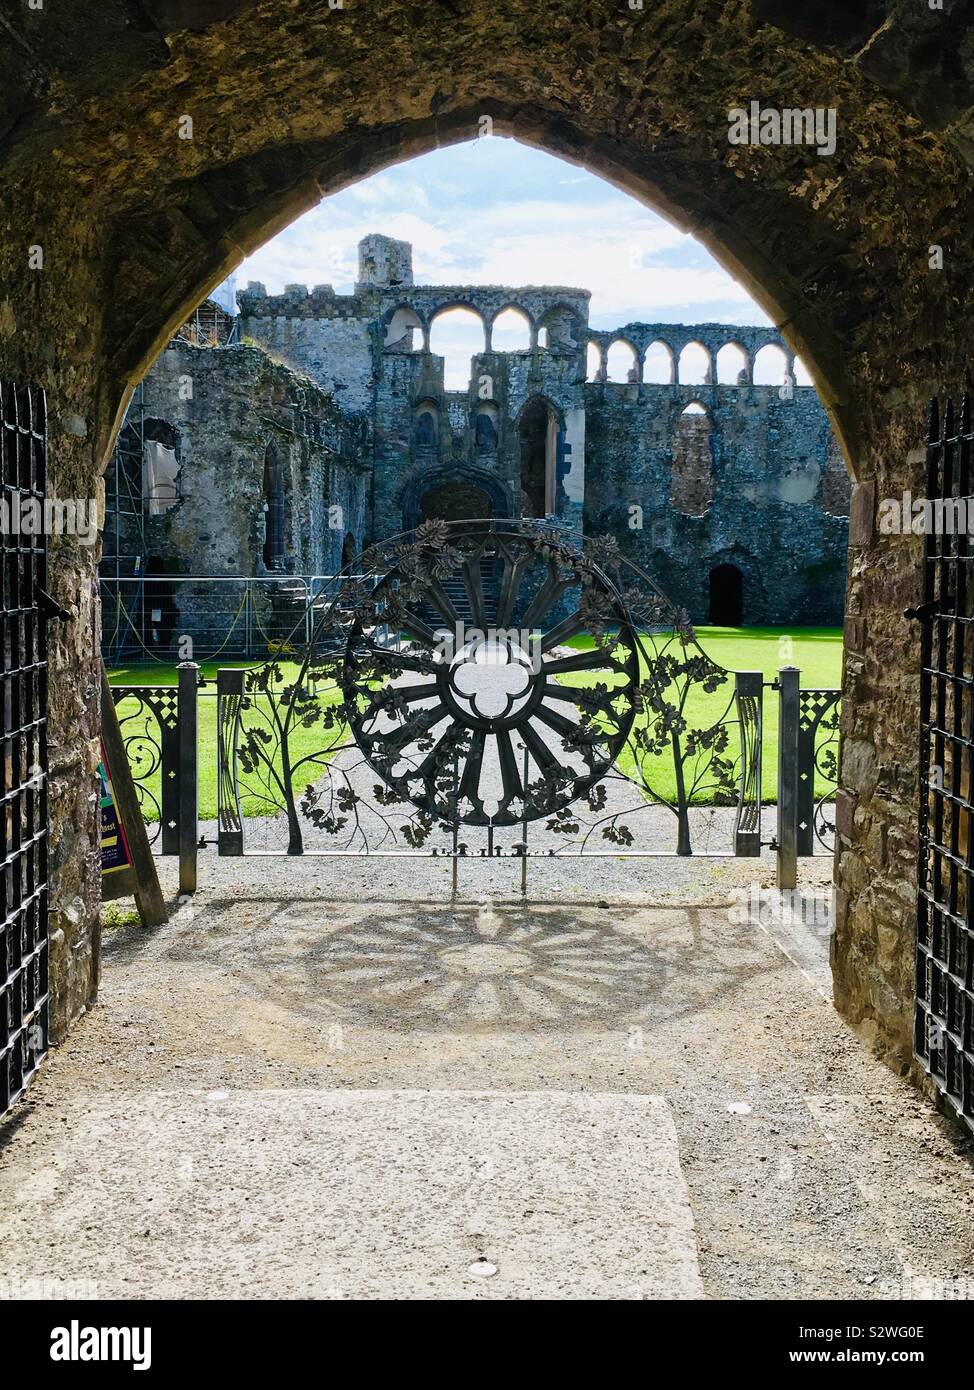 Medieval ruins of the Bishops Palace st. Davids, Pembrokeshire. (From a time when Bishops were seen as Princes of the church). The gates were designed and made by Rubin Eynon and Glen Adams Stock Photo